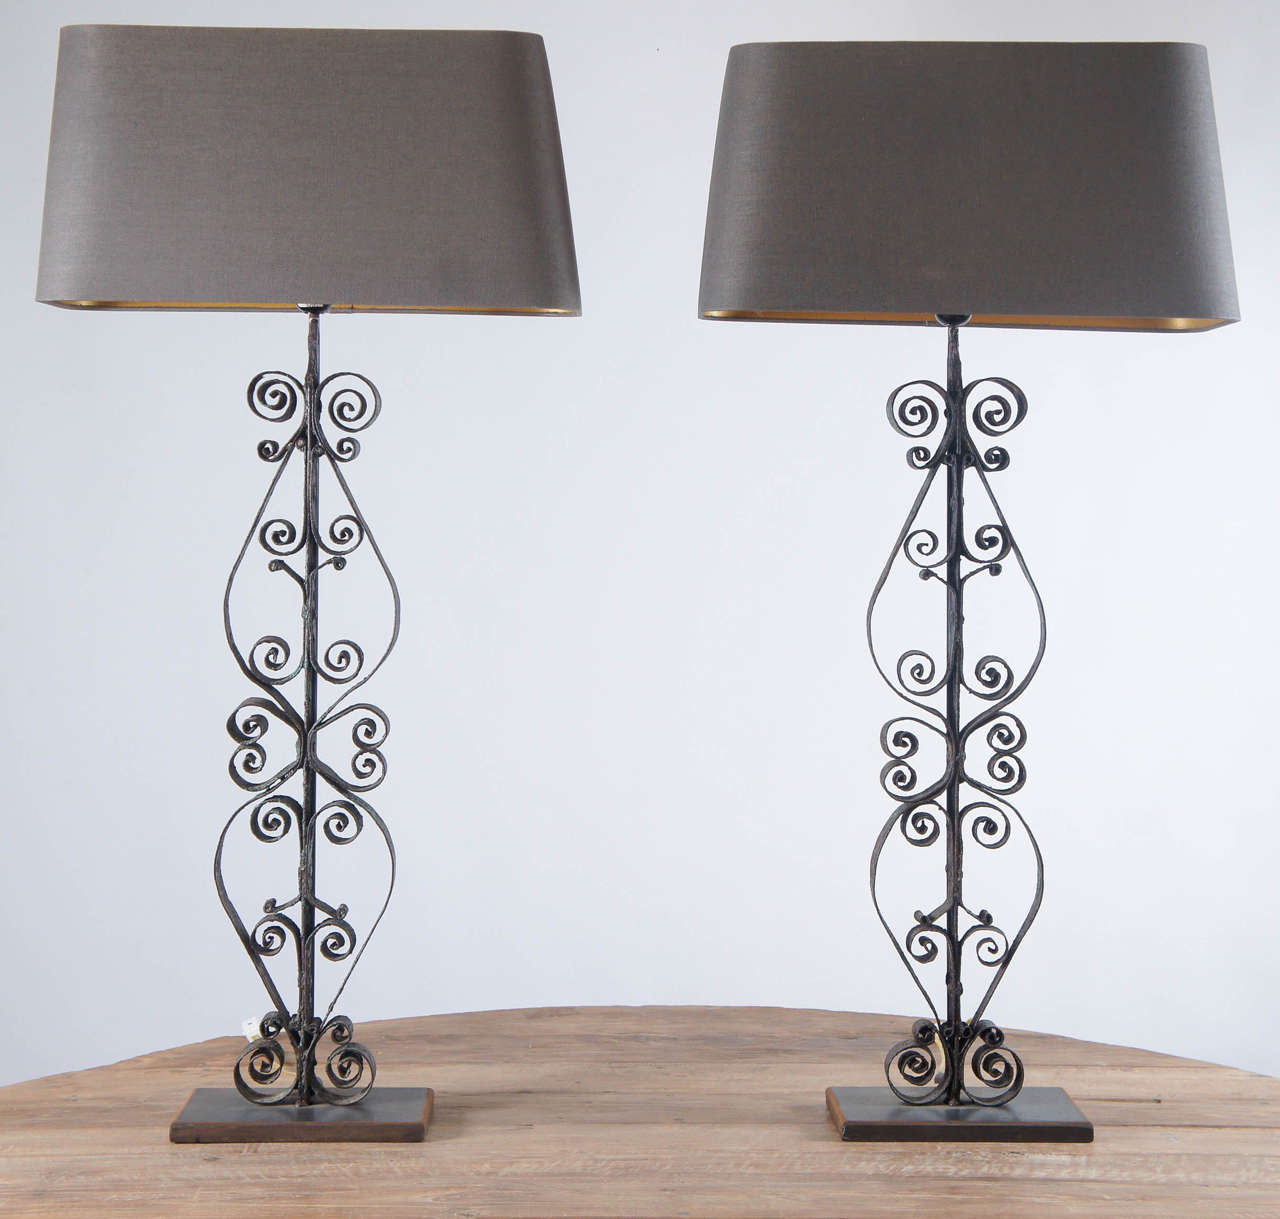 Pair of lamps composed of antique handmade wrought iron balusters and metal bases wired for US electrical use. The balusters are partially crusted with blue-green paint.  The rounded rectangular taupe shades are lined in gold to give off a warm